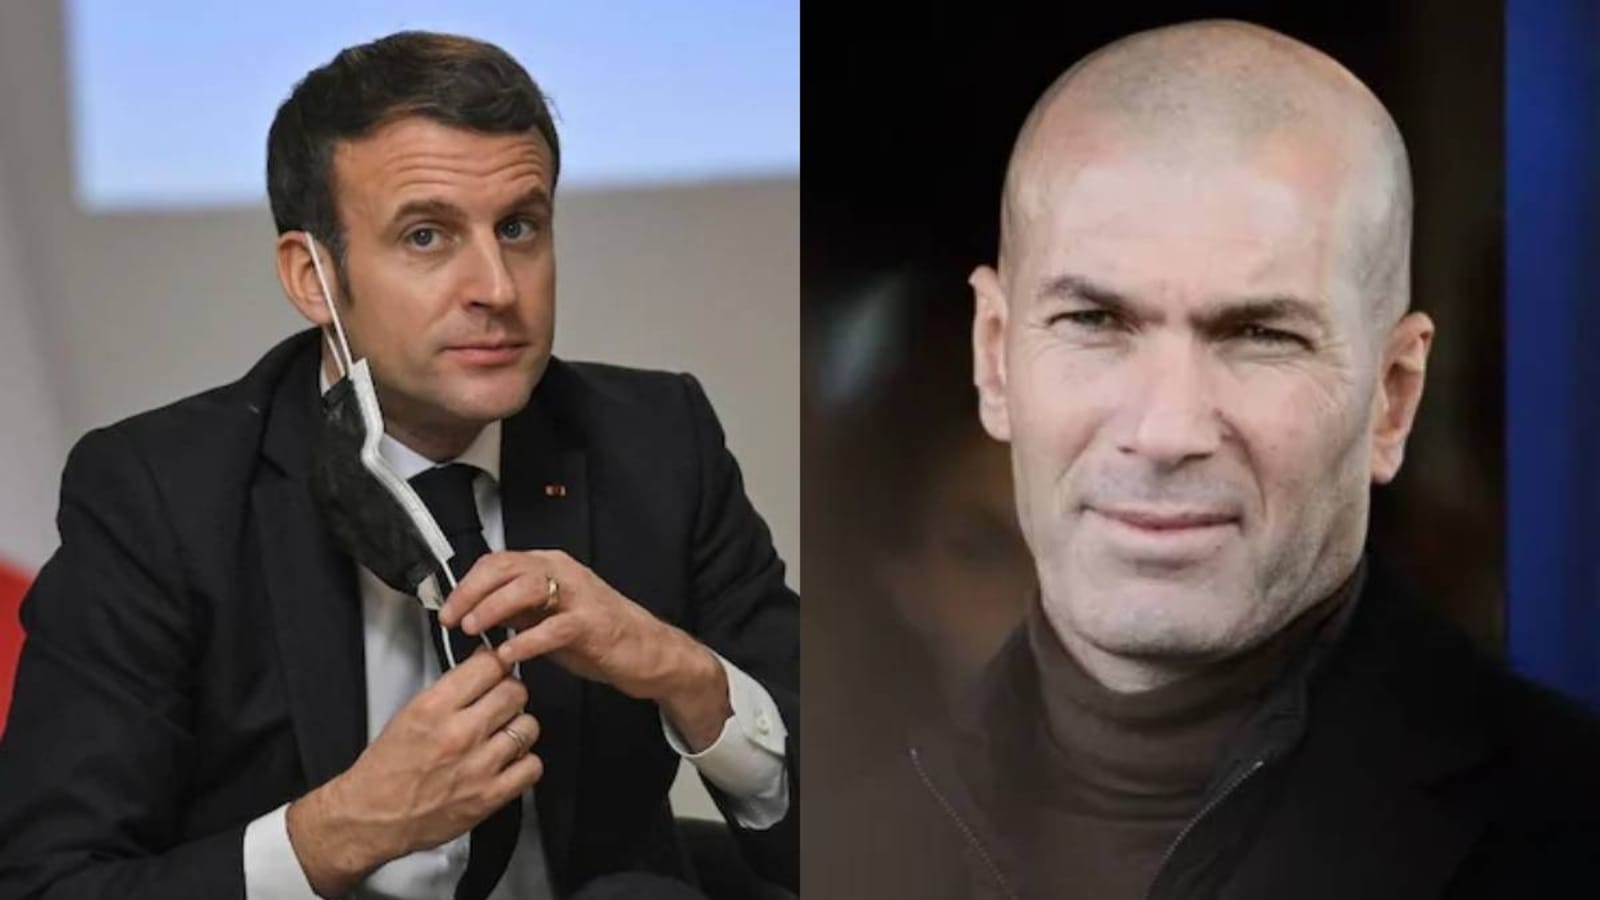 French President Emmanuel Macron backs Zidane to manage PSG after his role in Kylian Mbappe’s stay